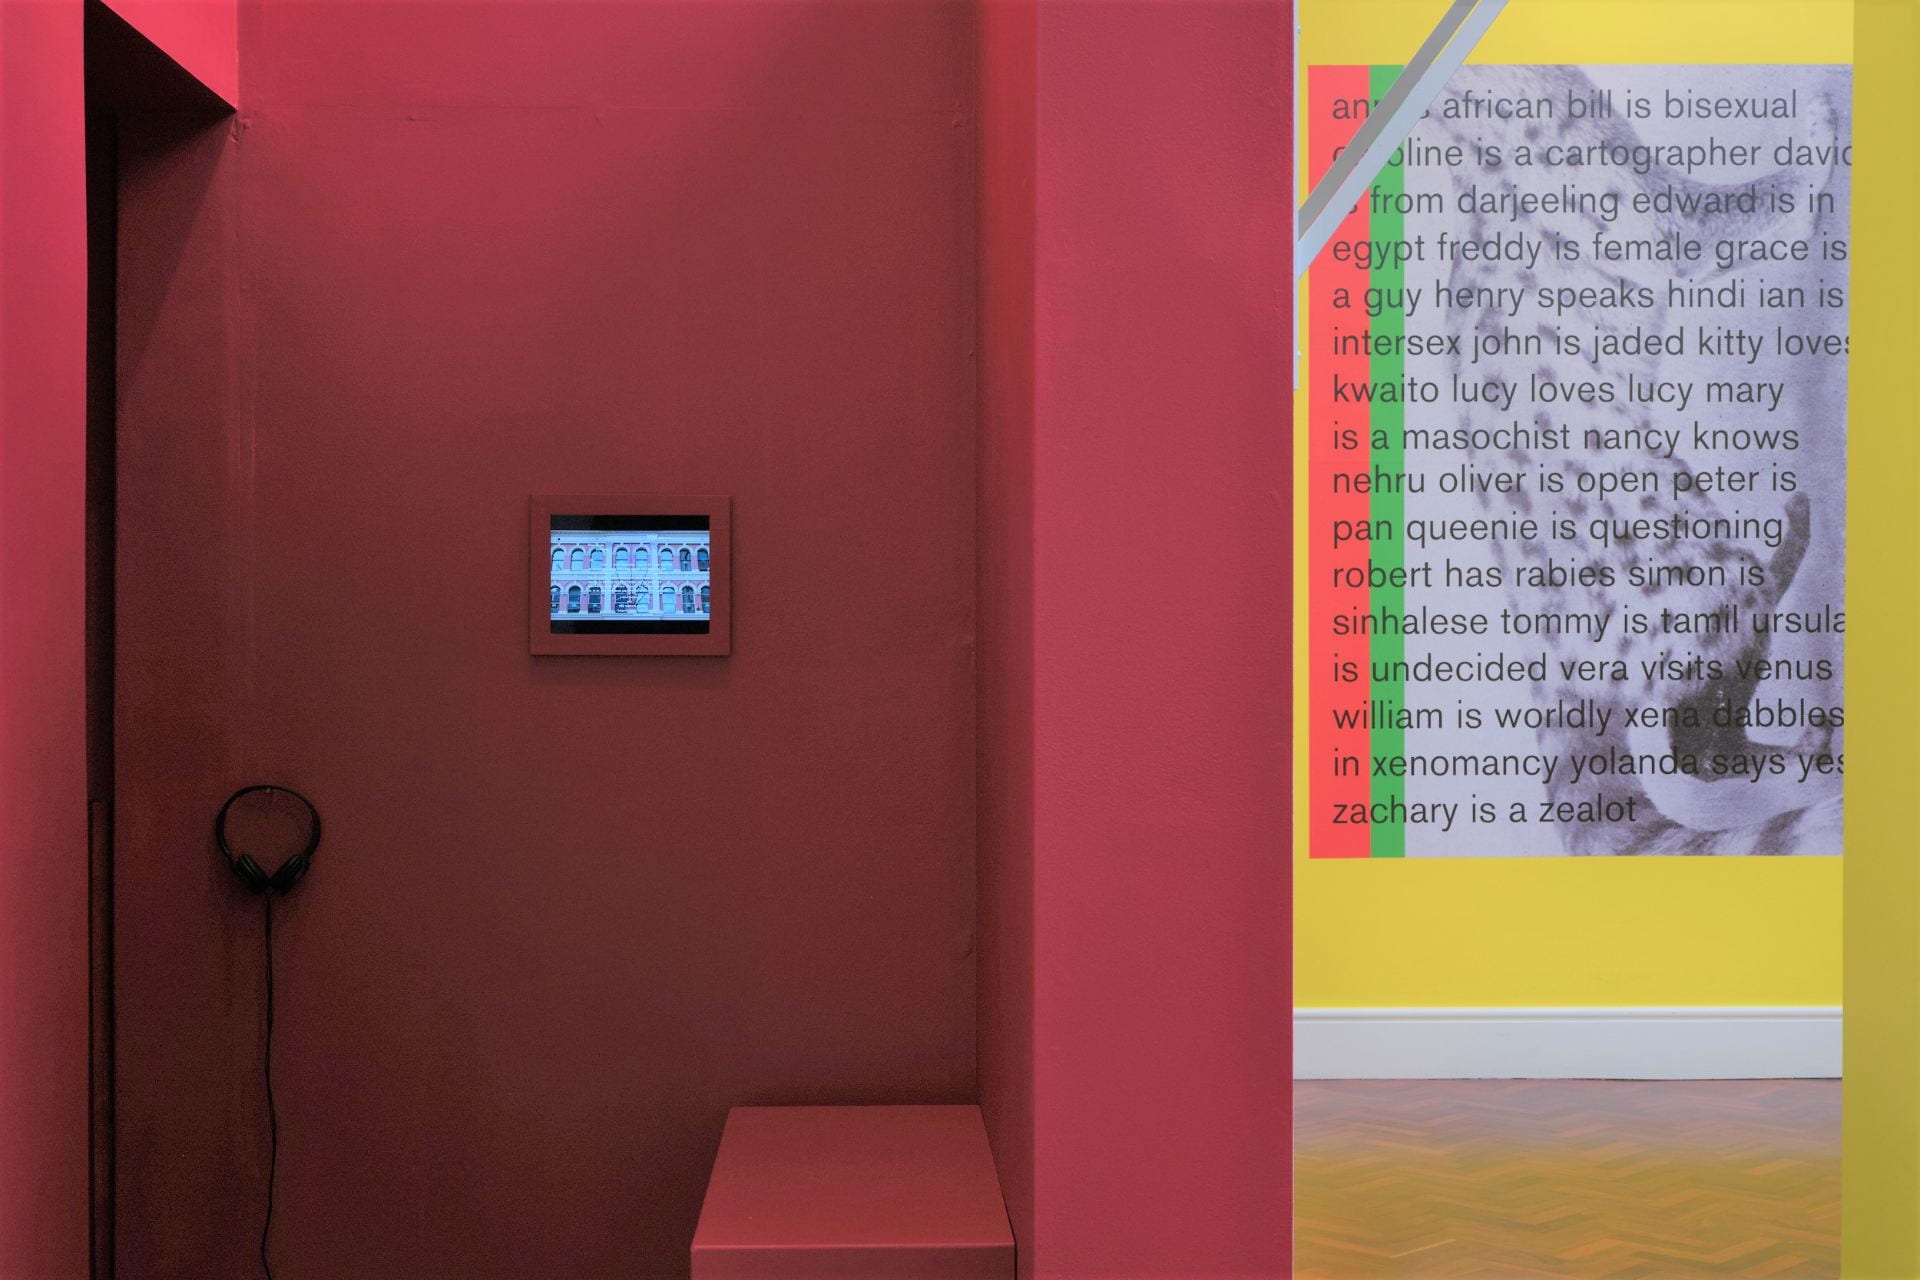 A red booth space with a small iPad playing a film mounted on the wall. In the background is a large grey, red and green wallpaper on a yellow wall.